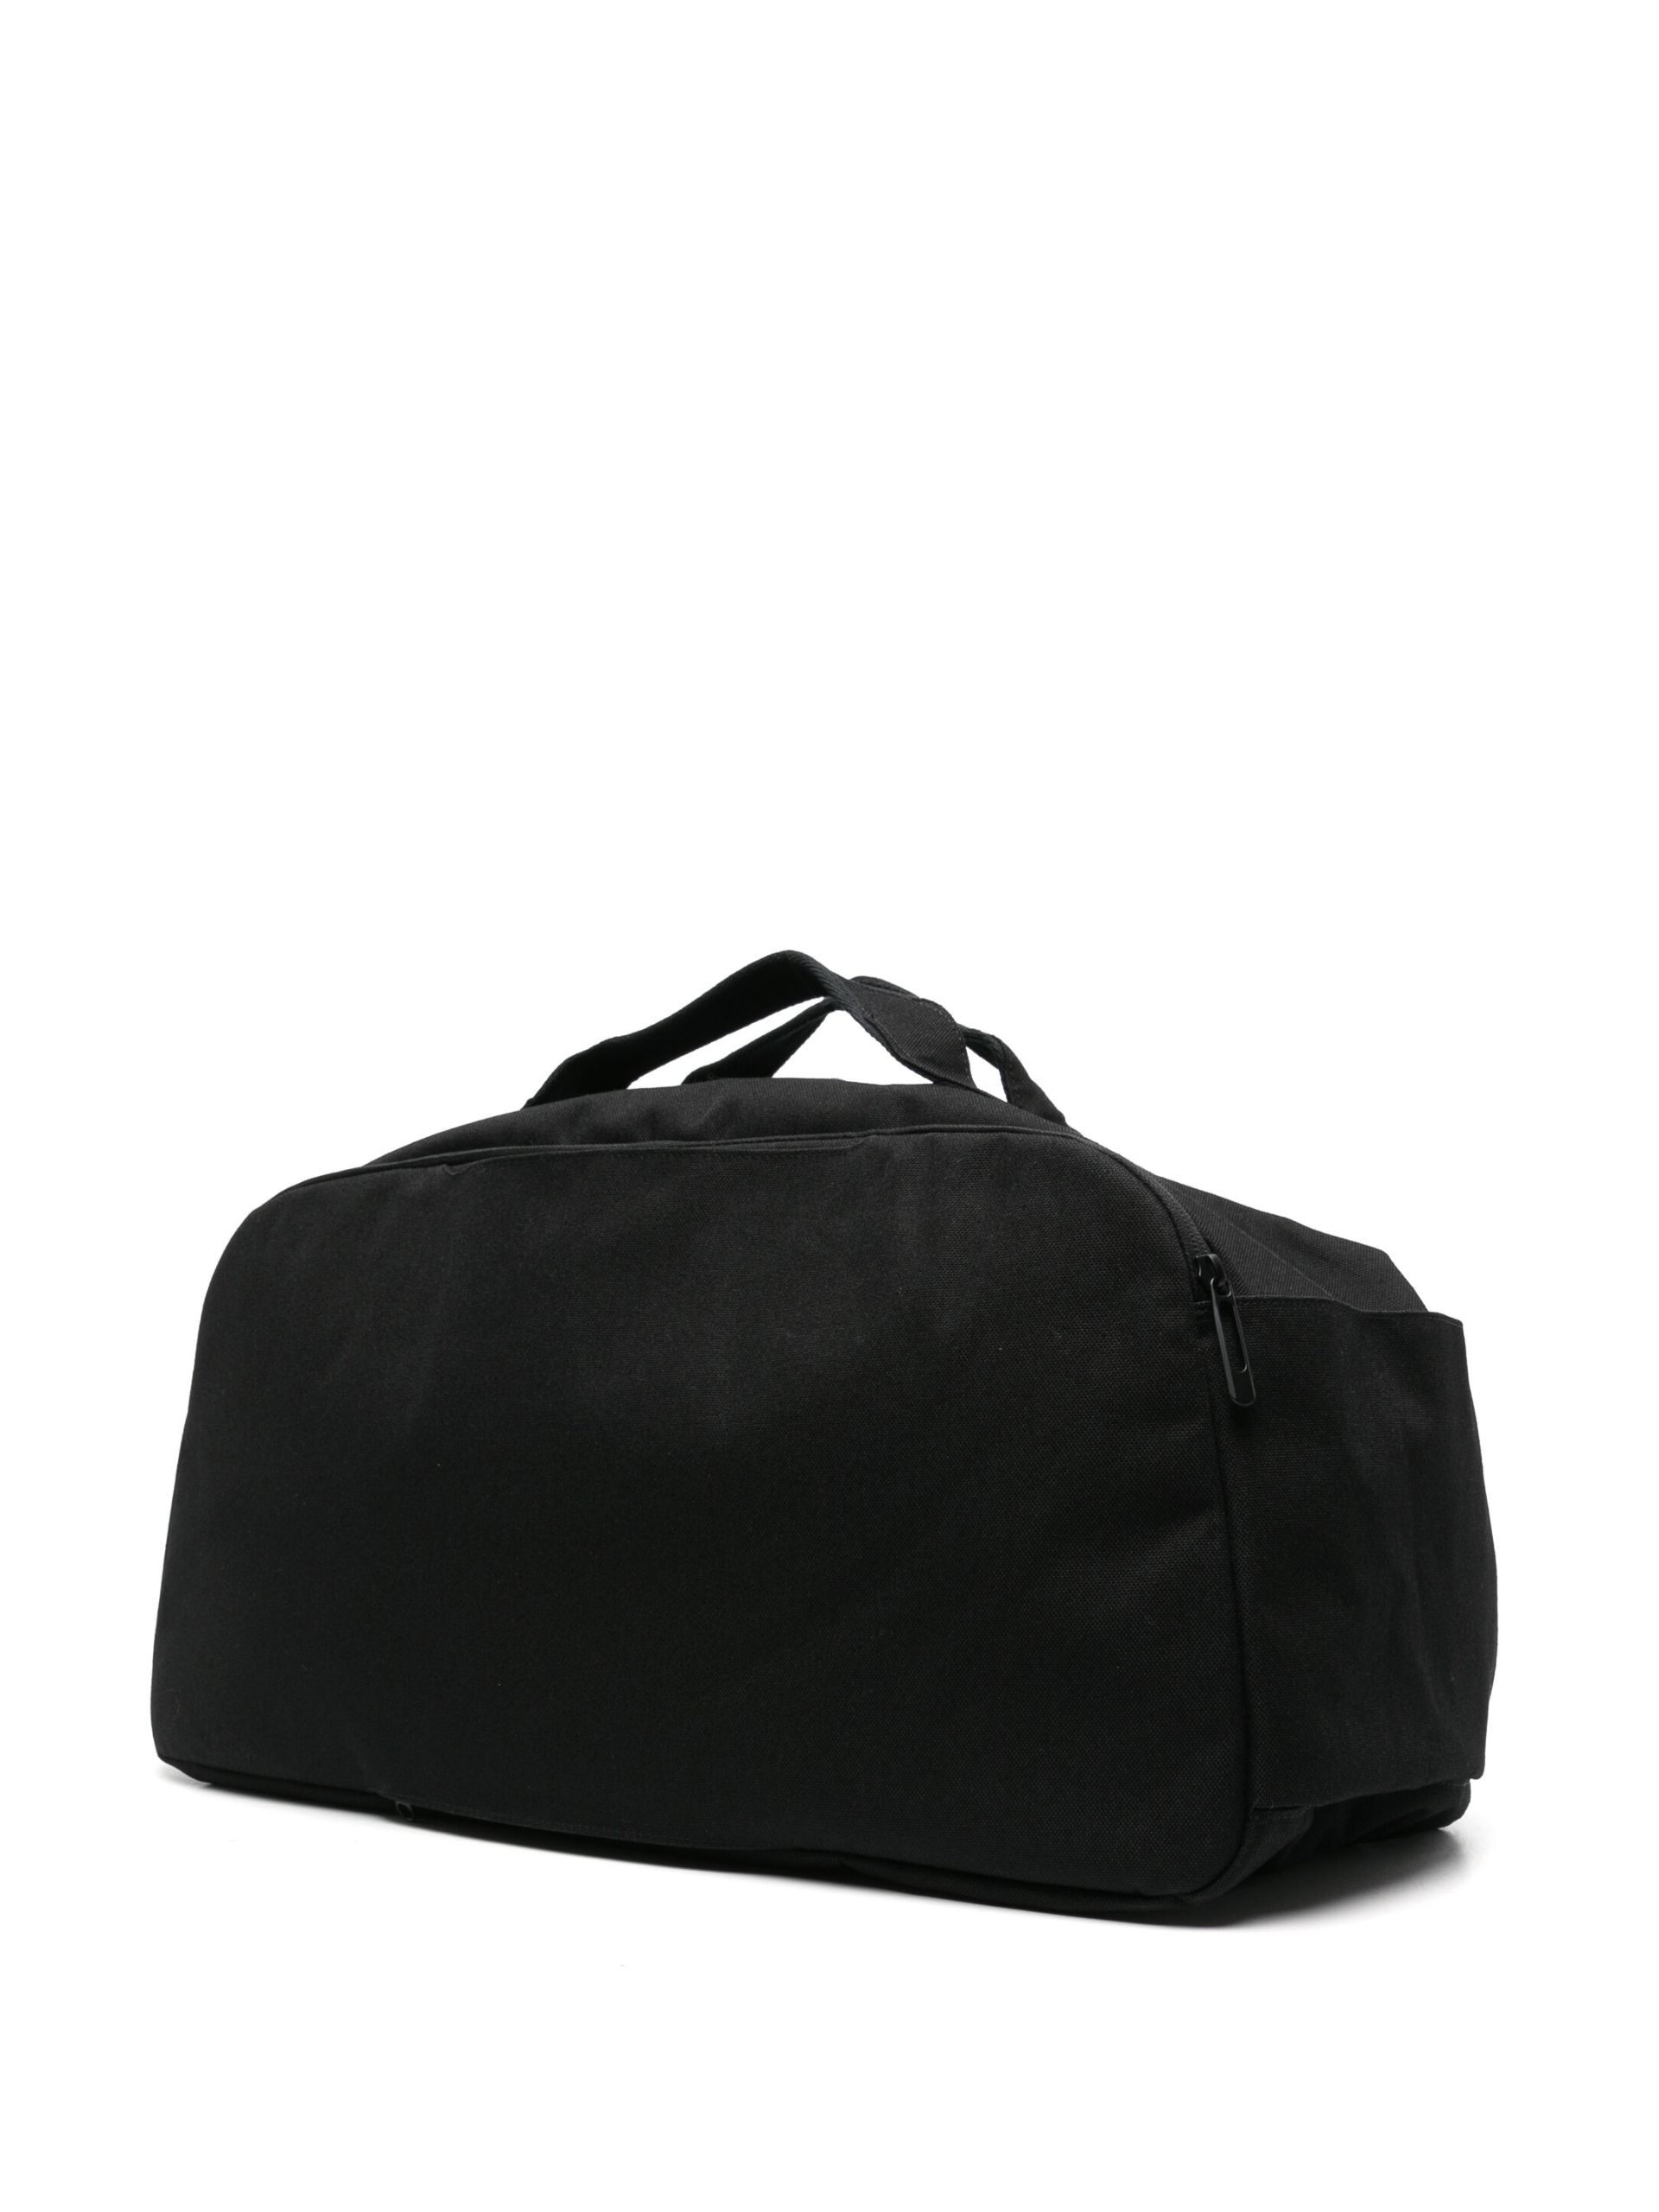 Black Command The Day Travel Bag - 2